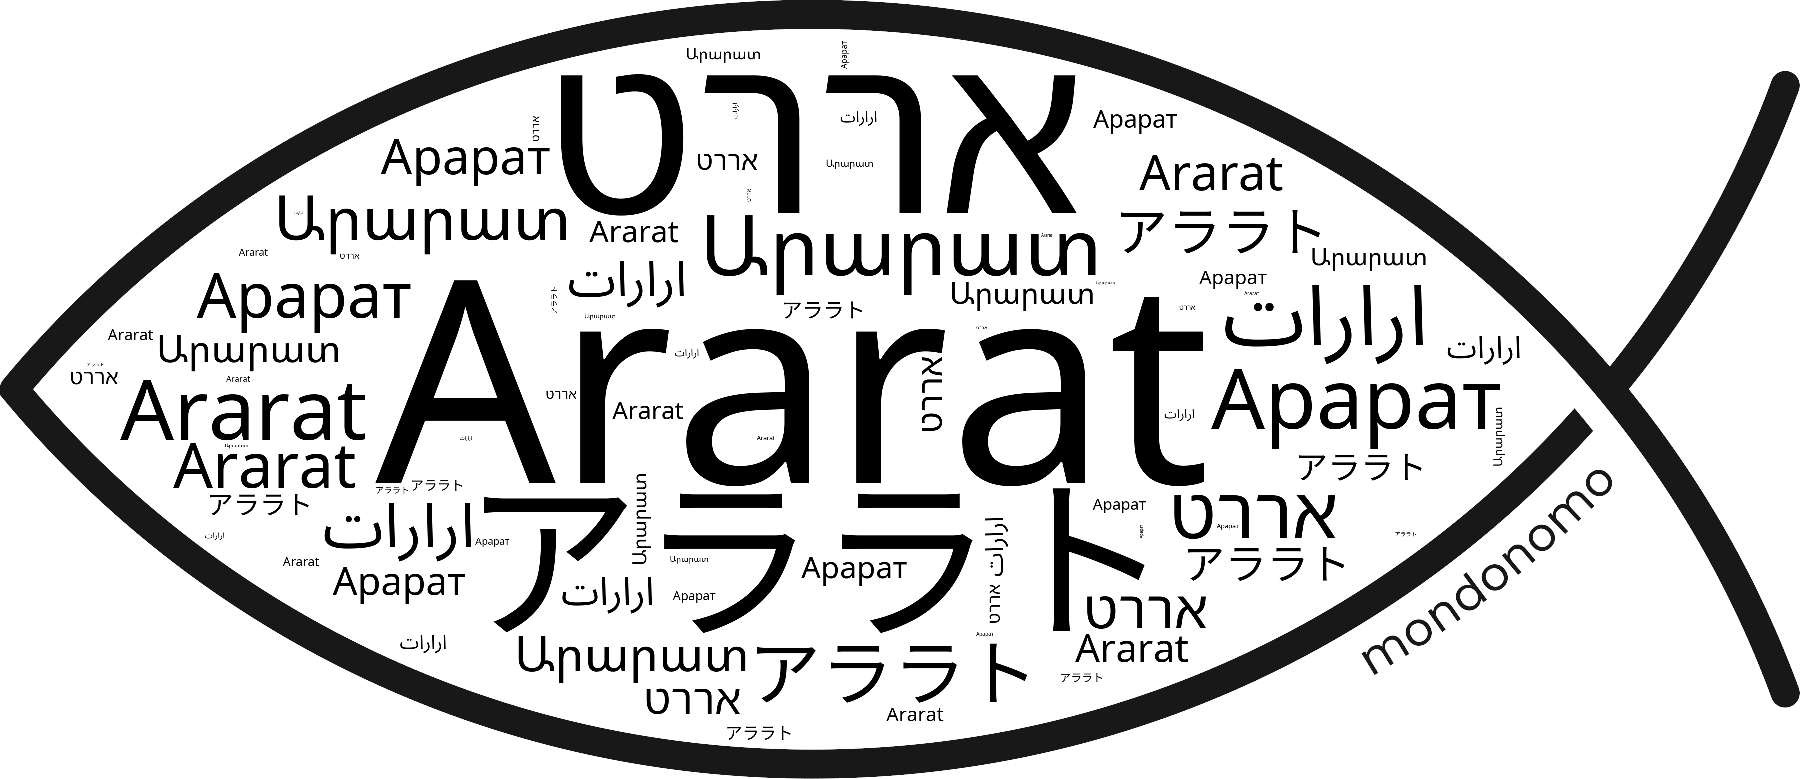 Name Ararat in the world's Bibles